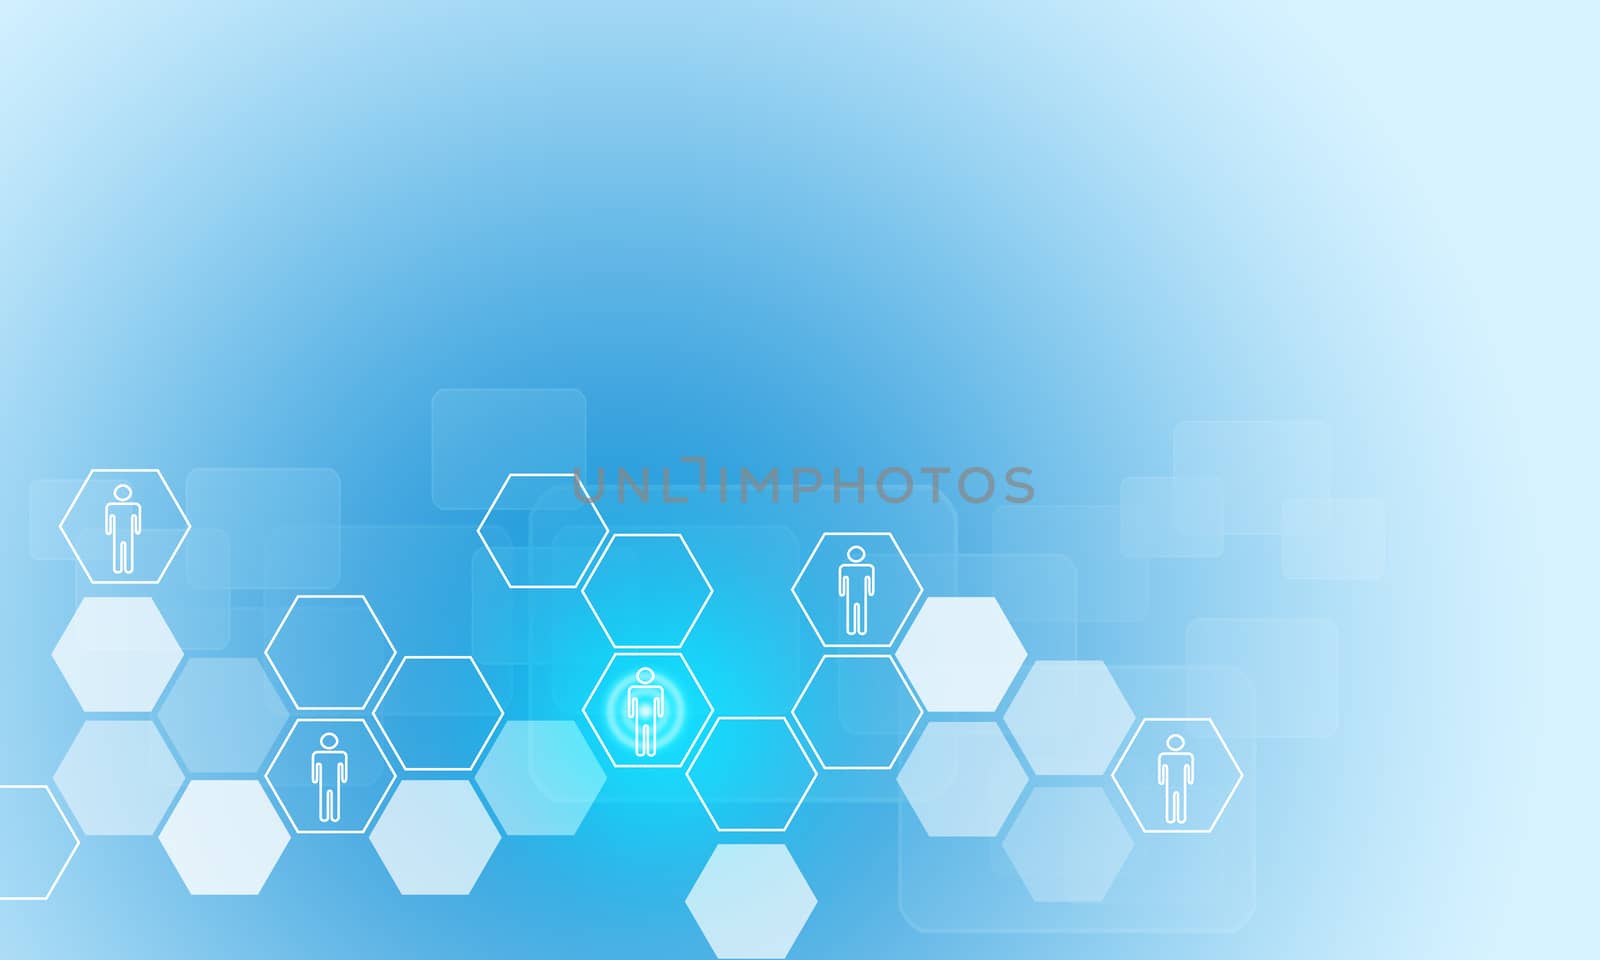 Hexagons with people icons and transparent rectangles on blue background